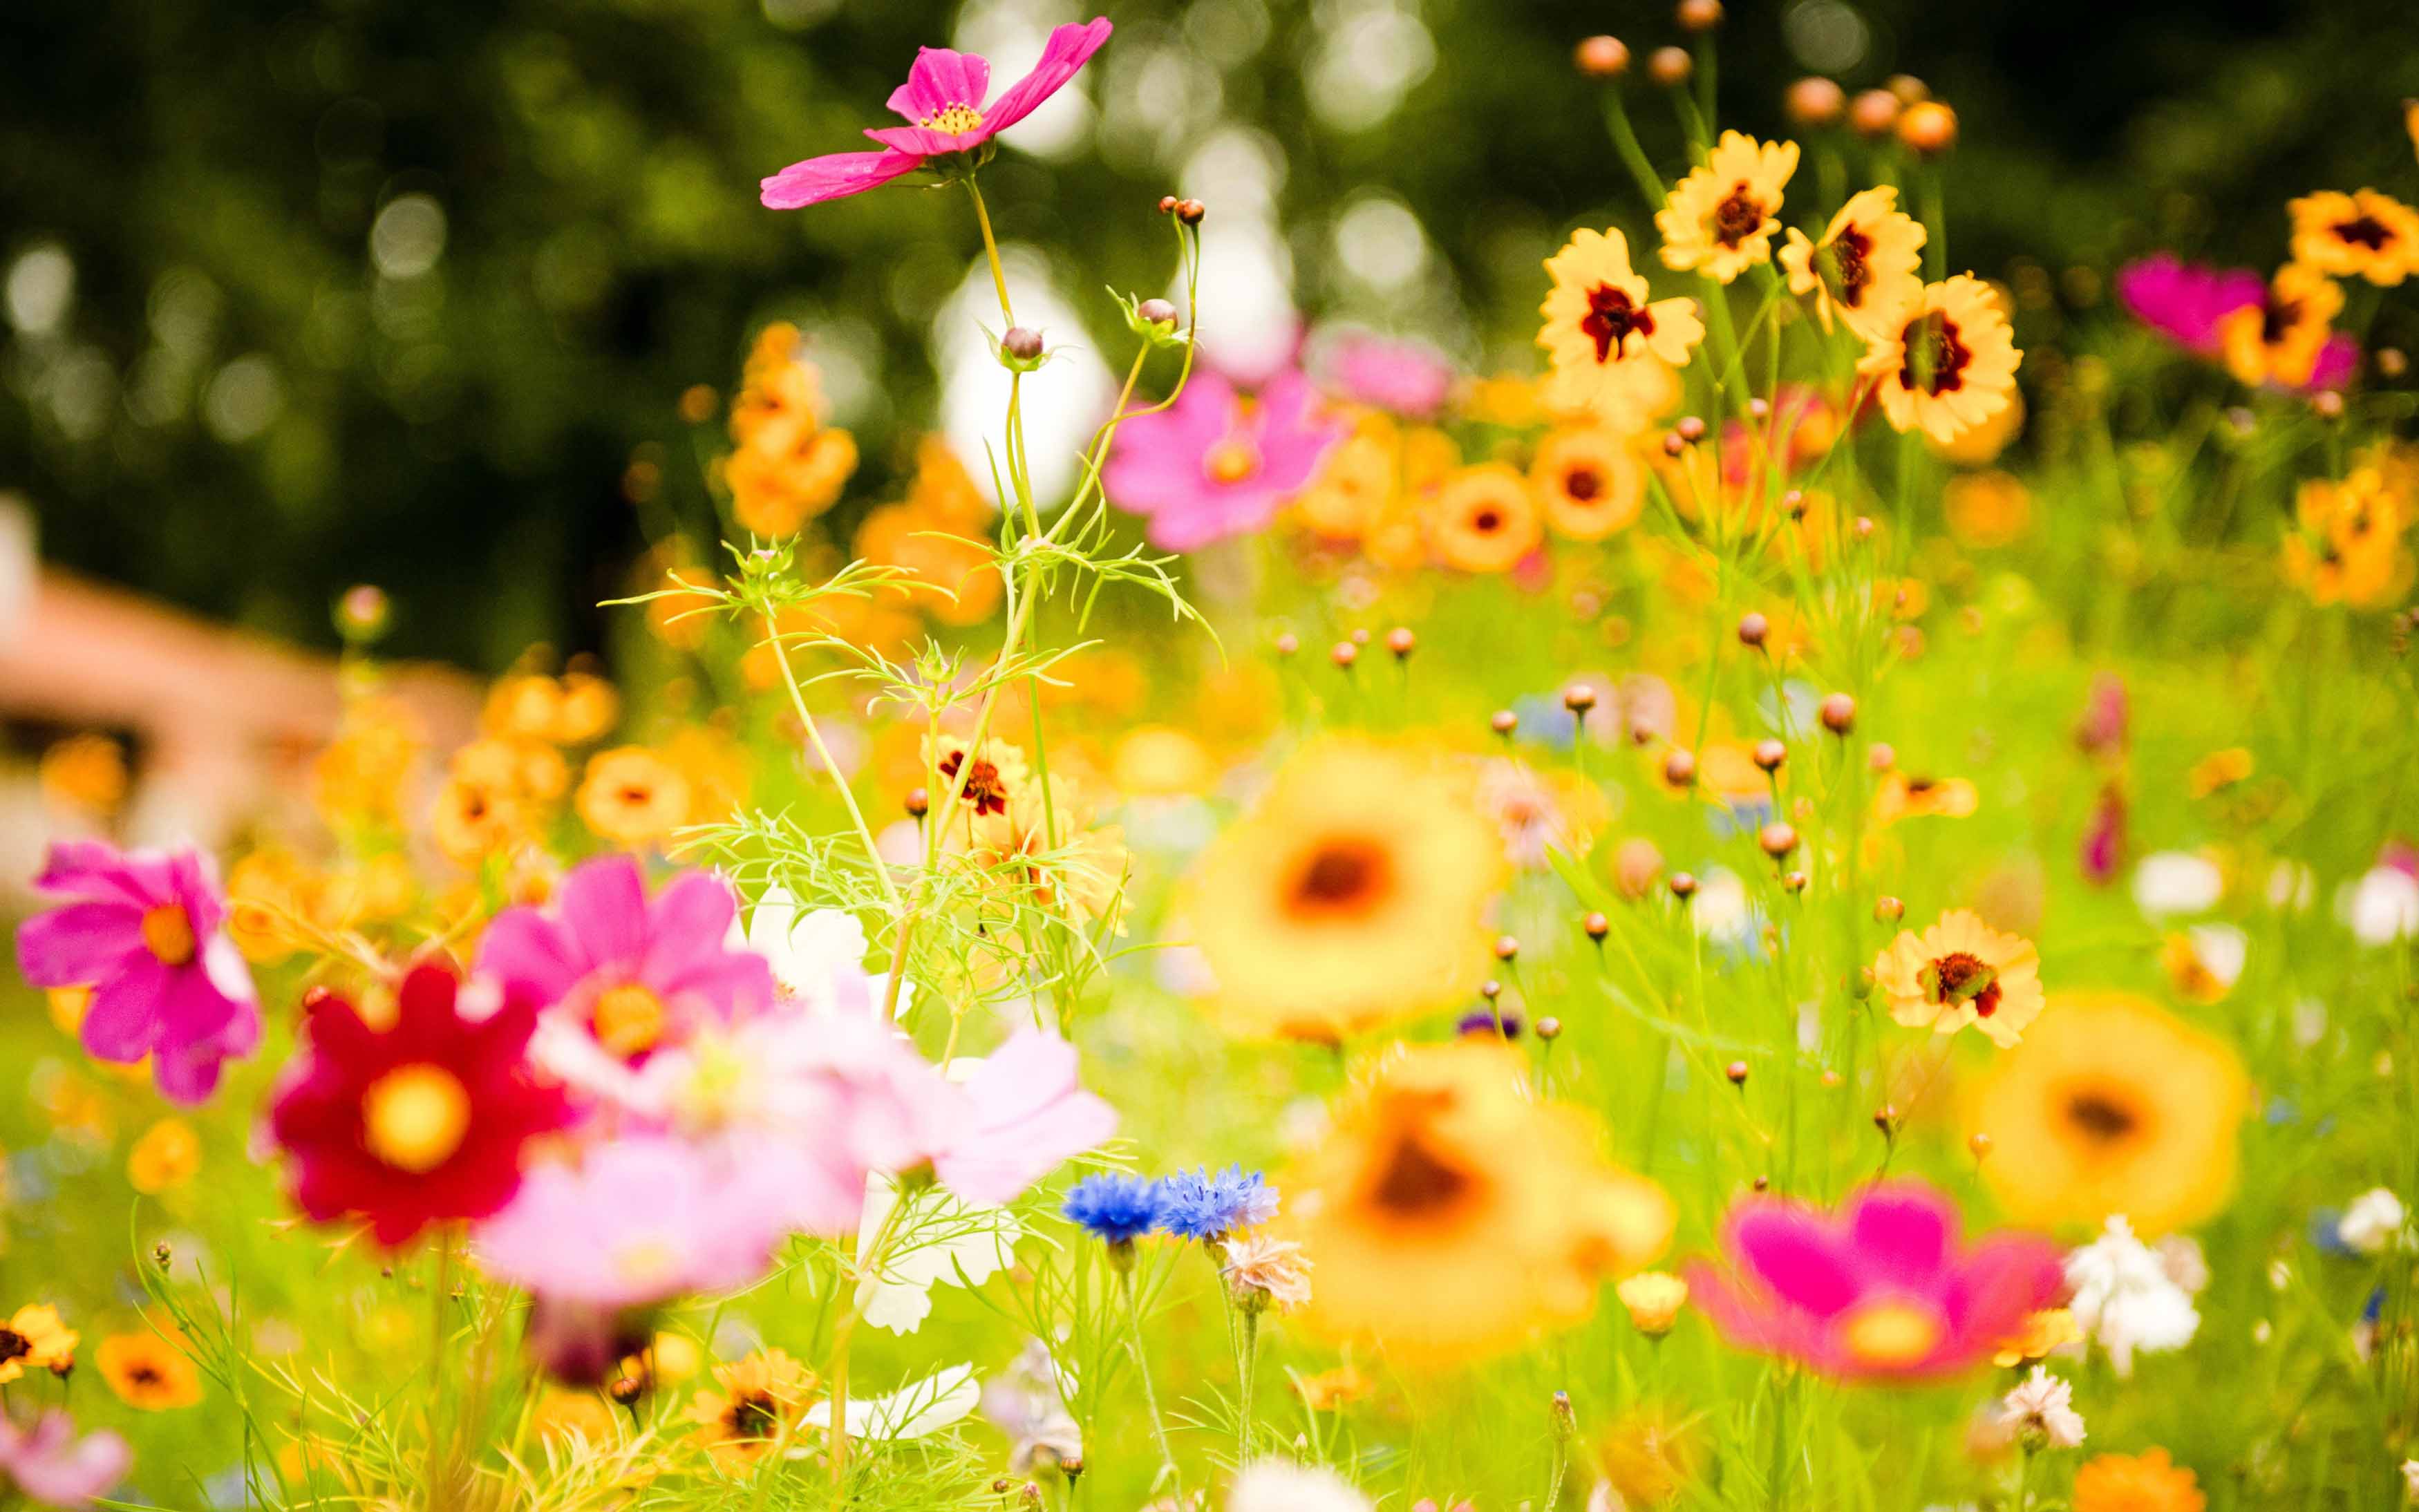 A field of flowers with some trees in the background - Bright